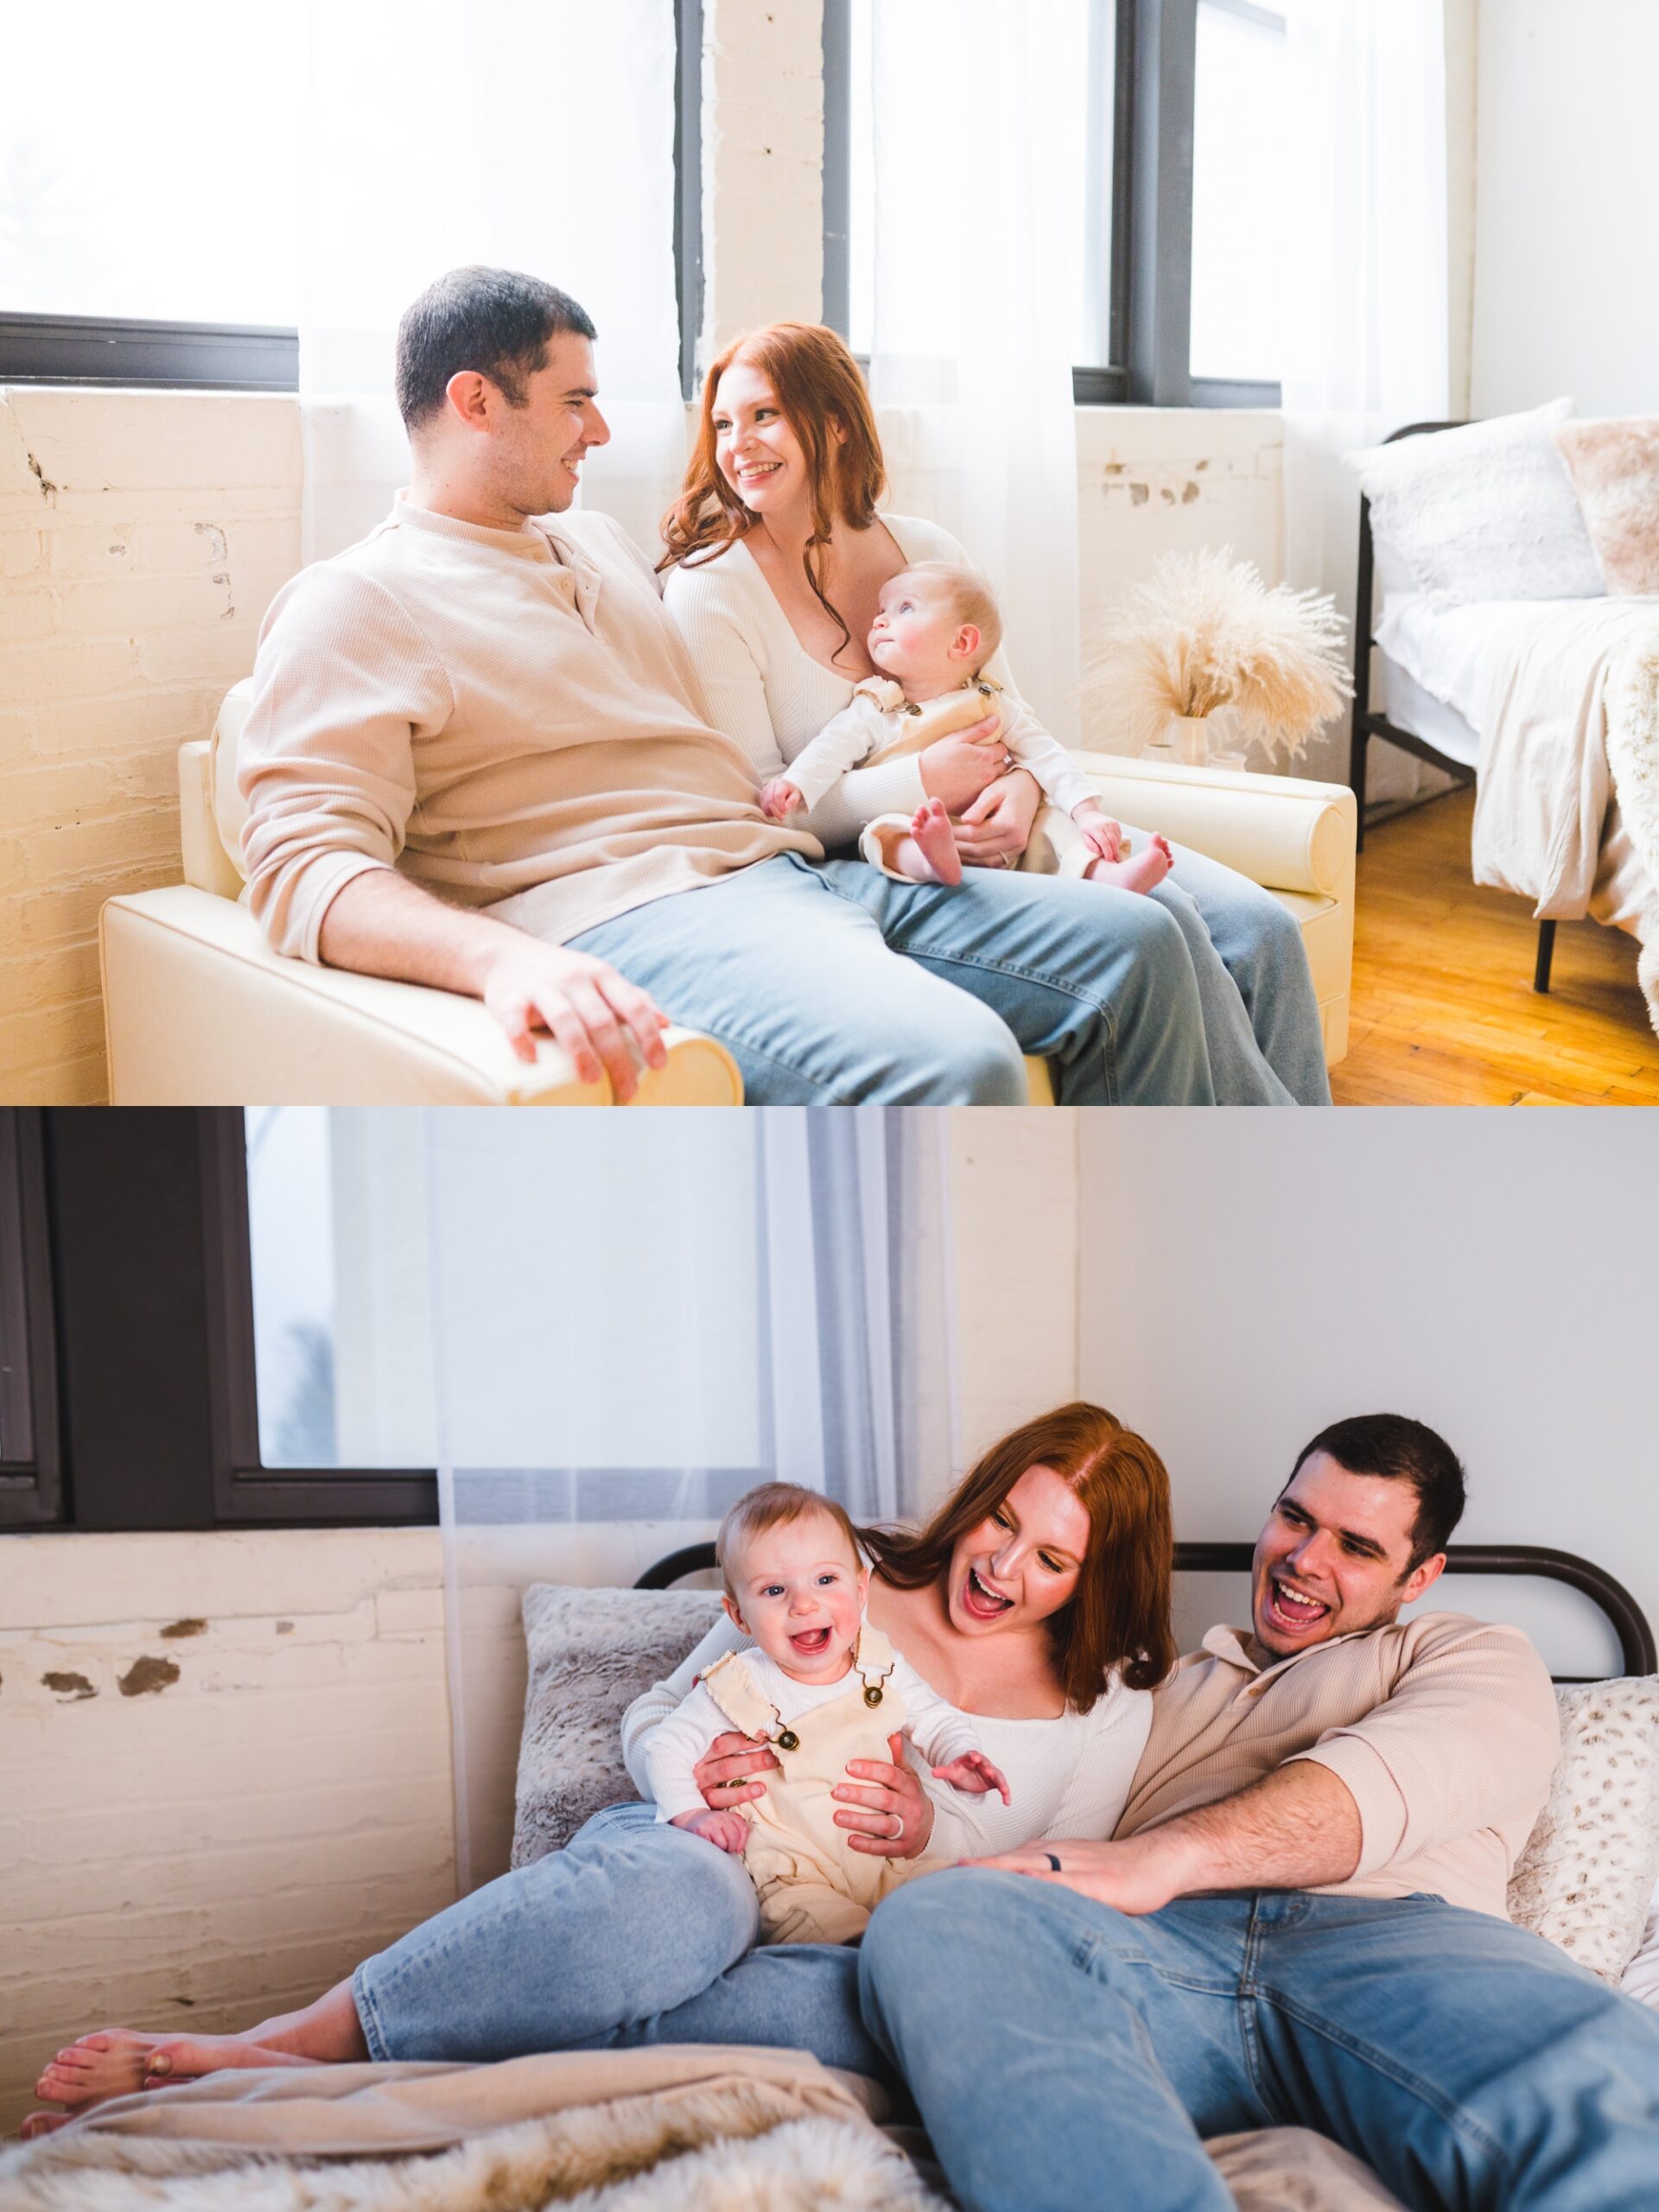 family together on couch and bed smiling | Melissa Sheridan Photography